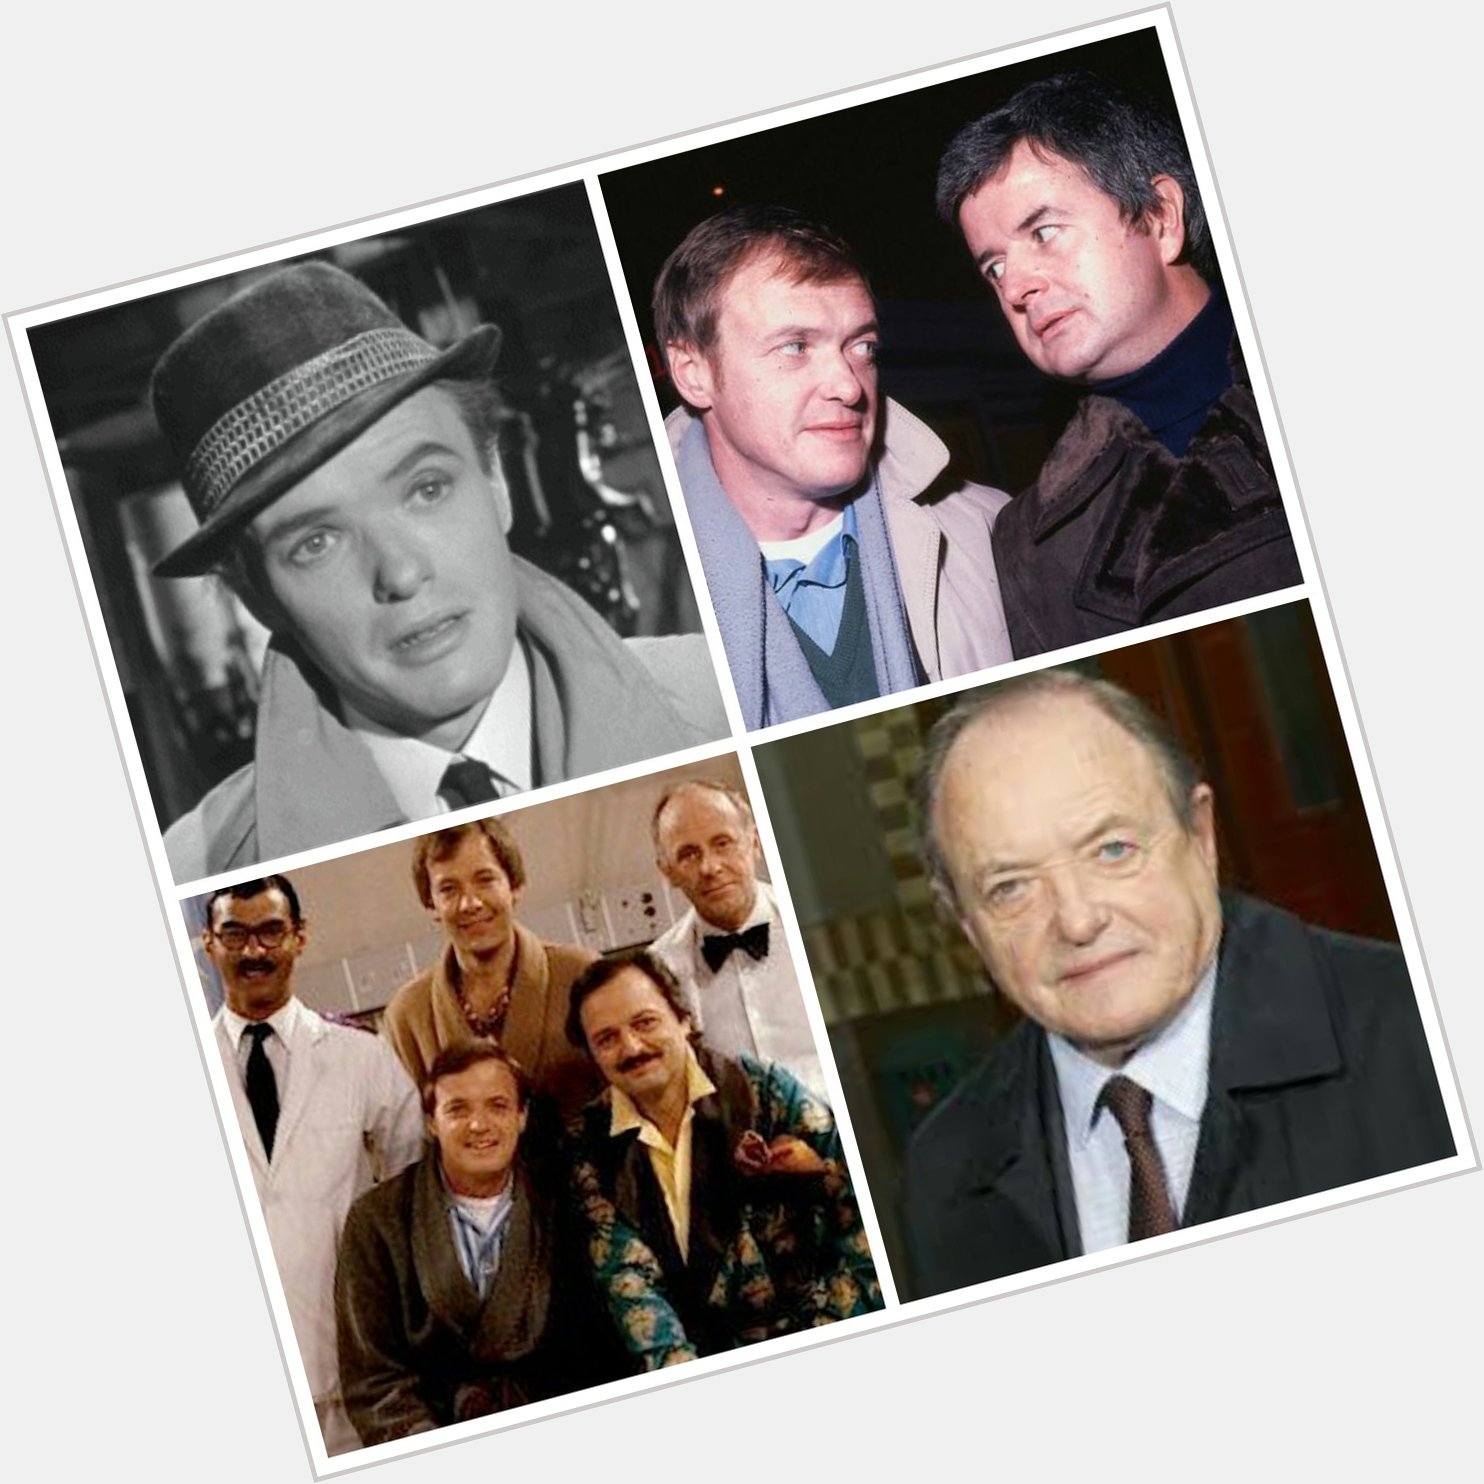 James Bolam is 82 today, Happy Birthday James! 